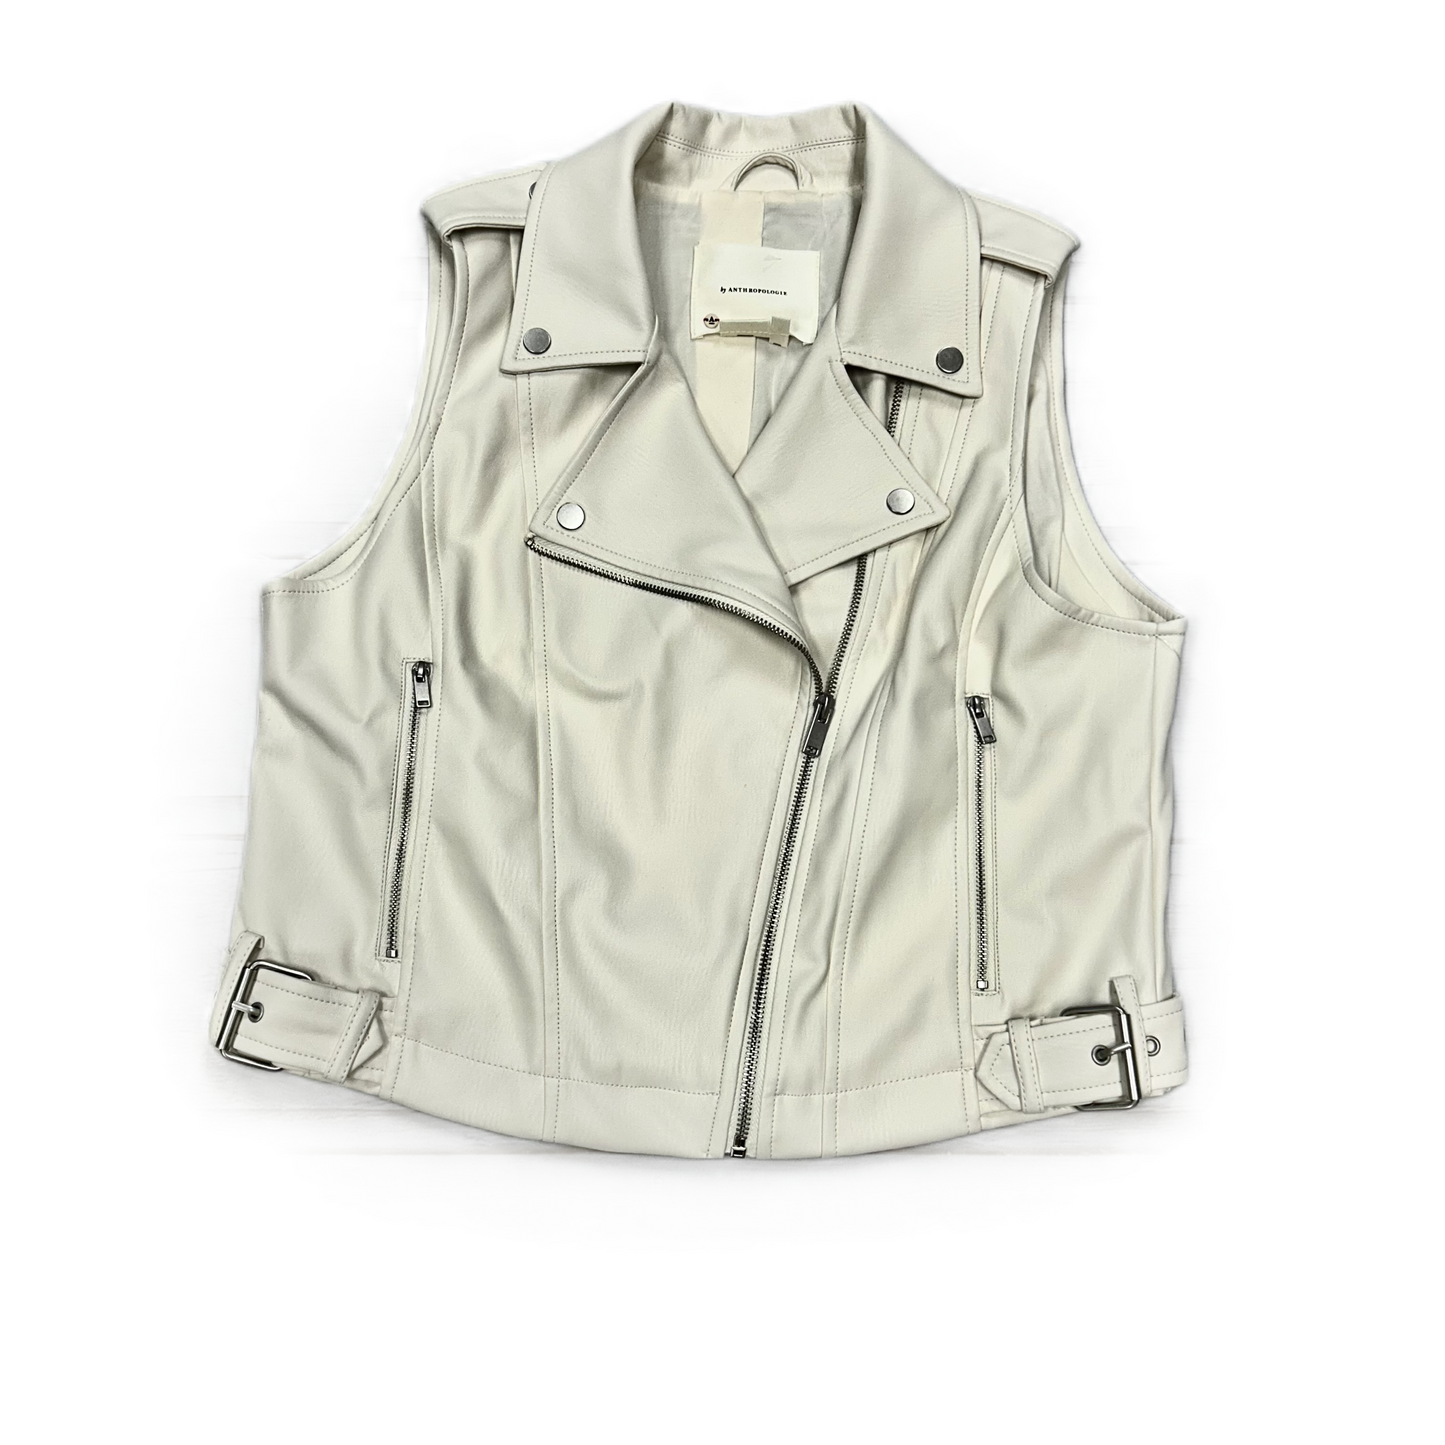 Vest Other By Anthropologie  Size: S